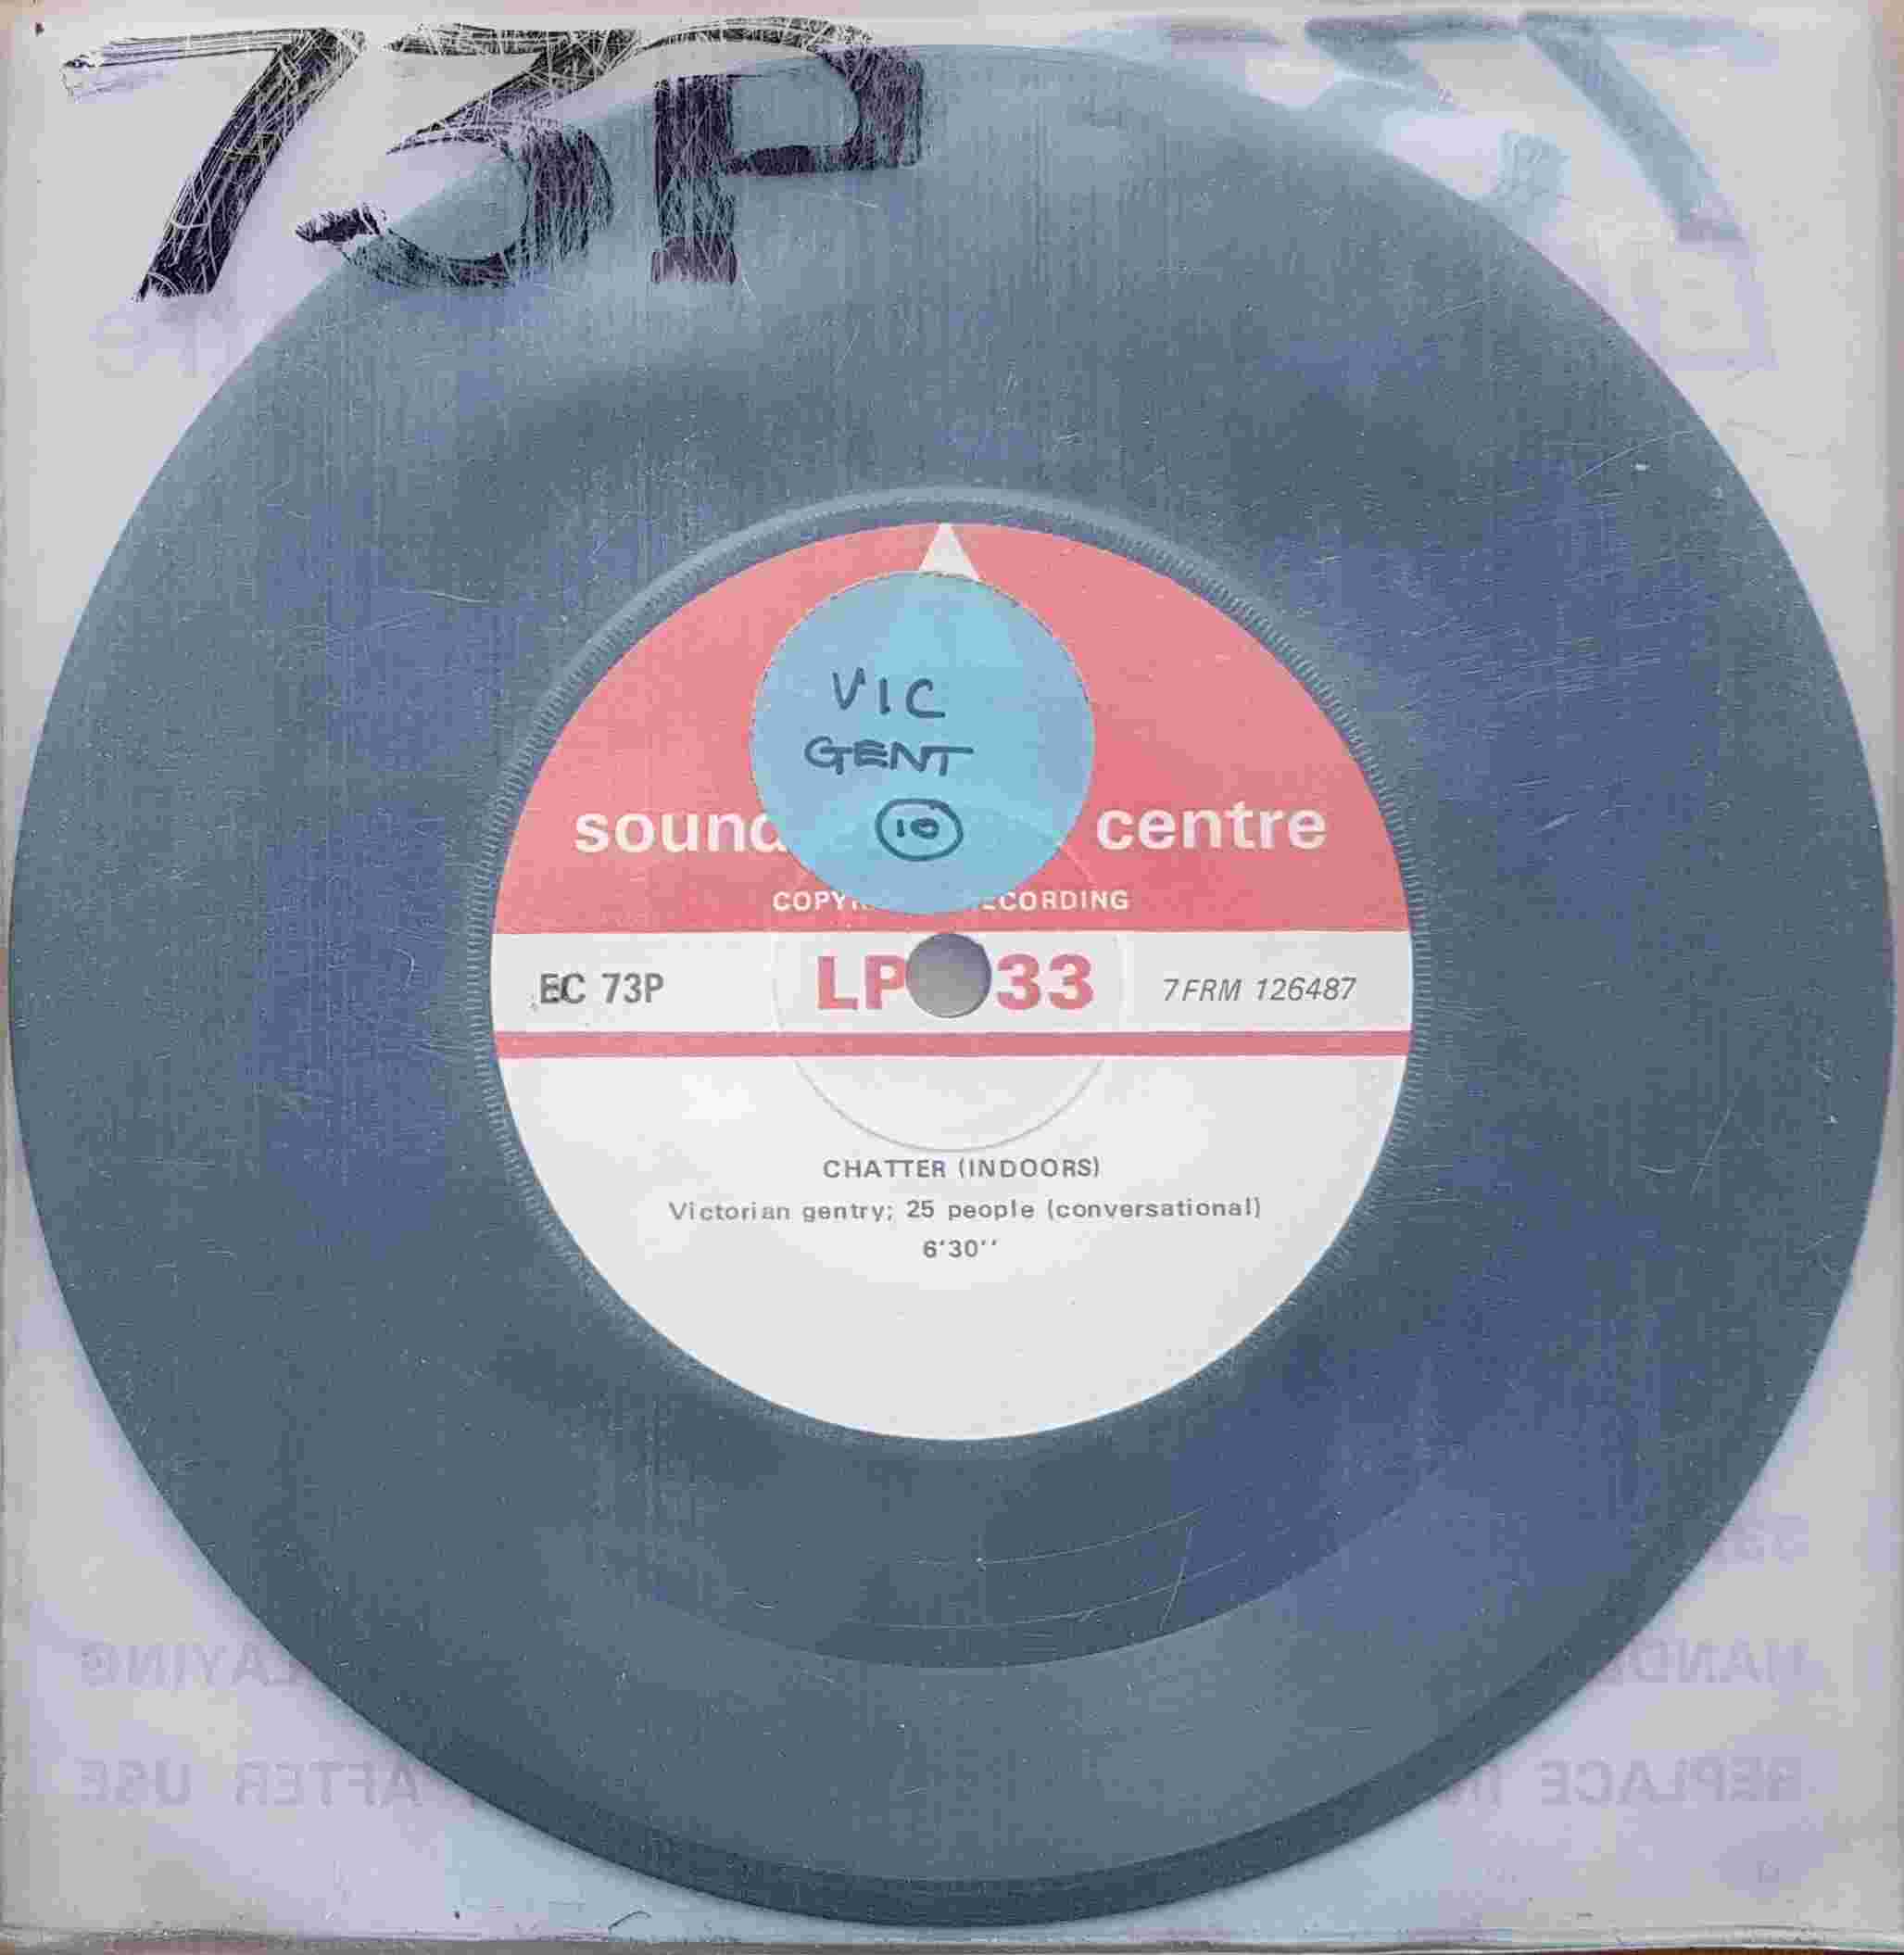 Picture of EC 73P Chatter (Indoors) by artist Not registered from the BBC records and Tapes library